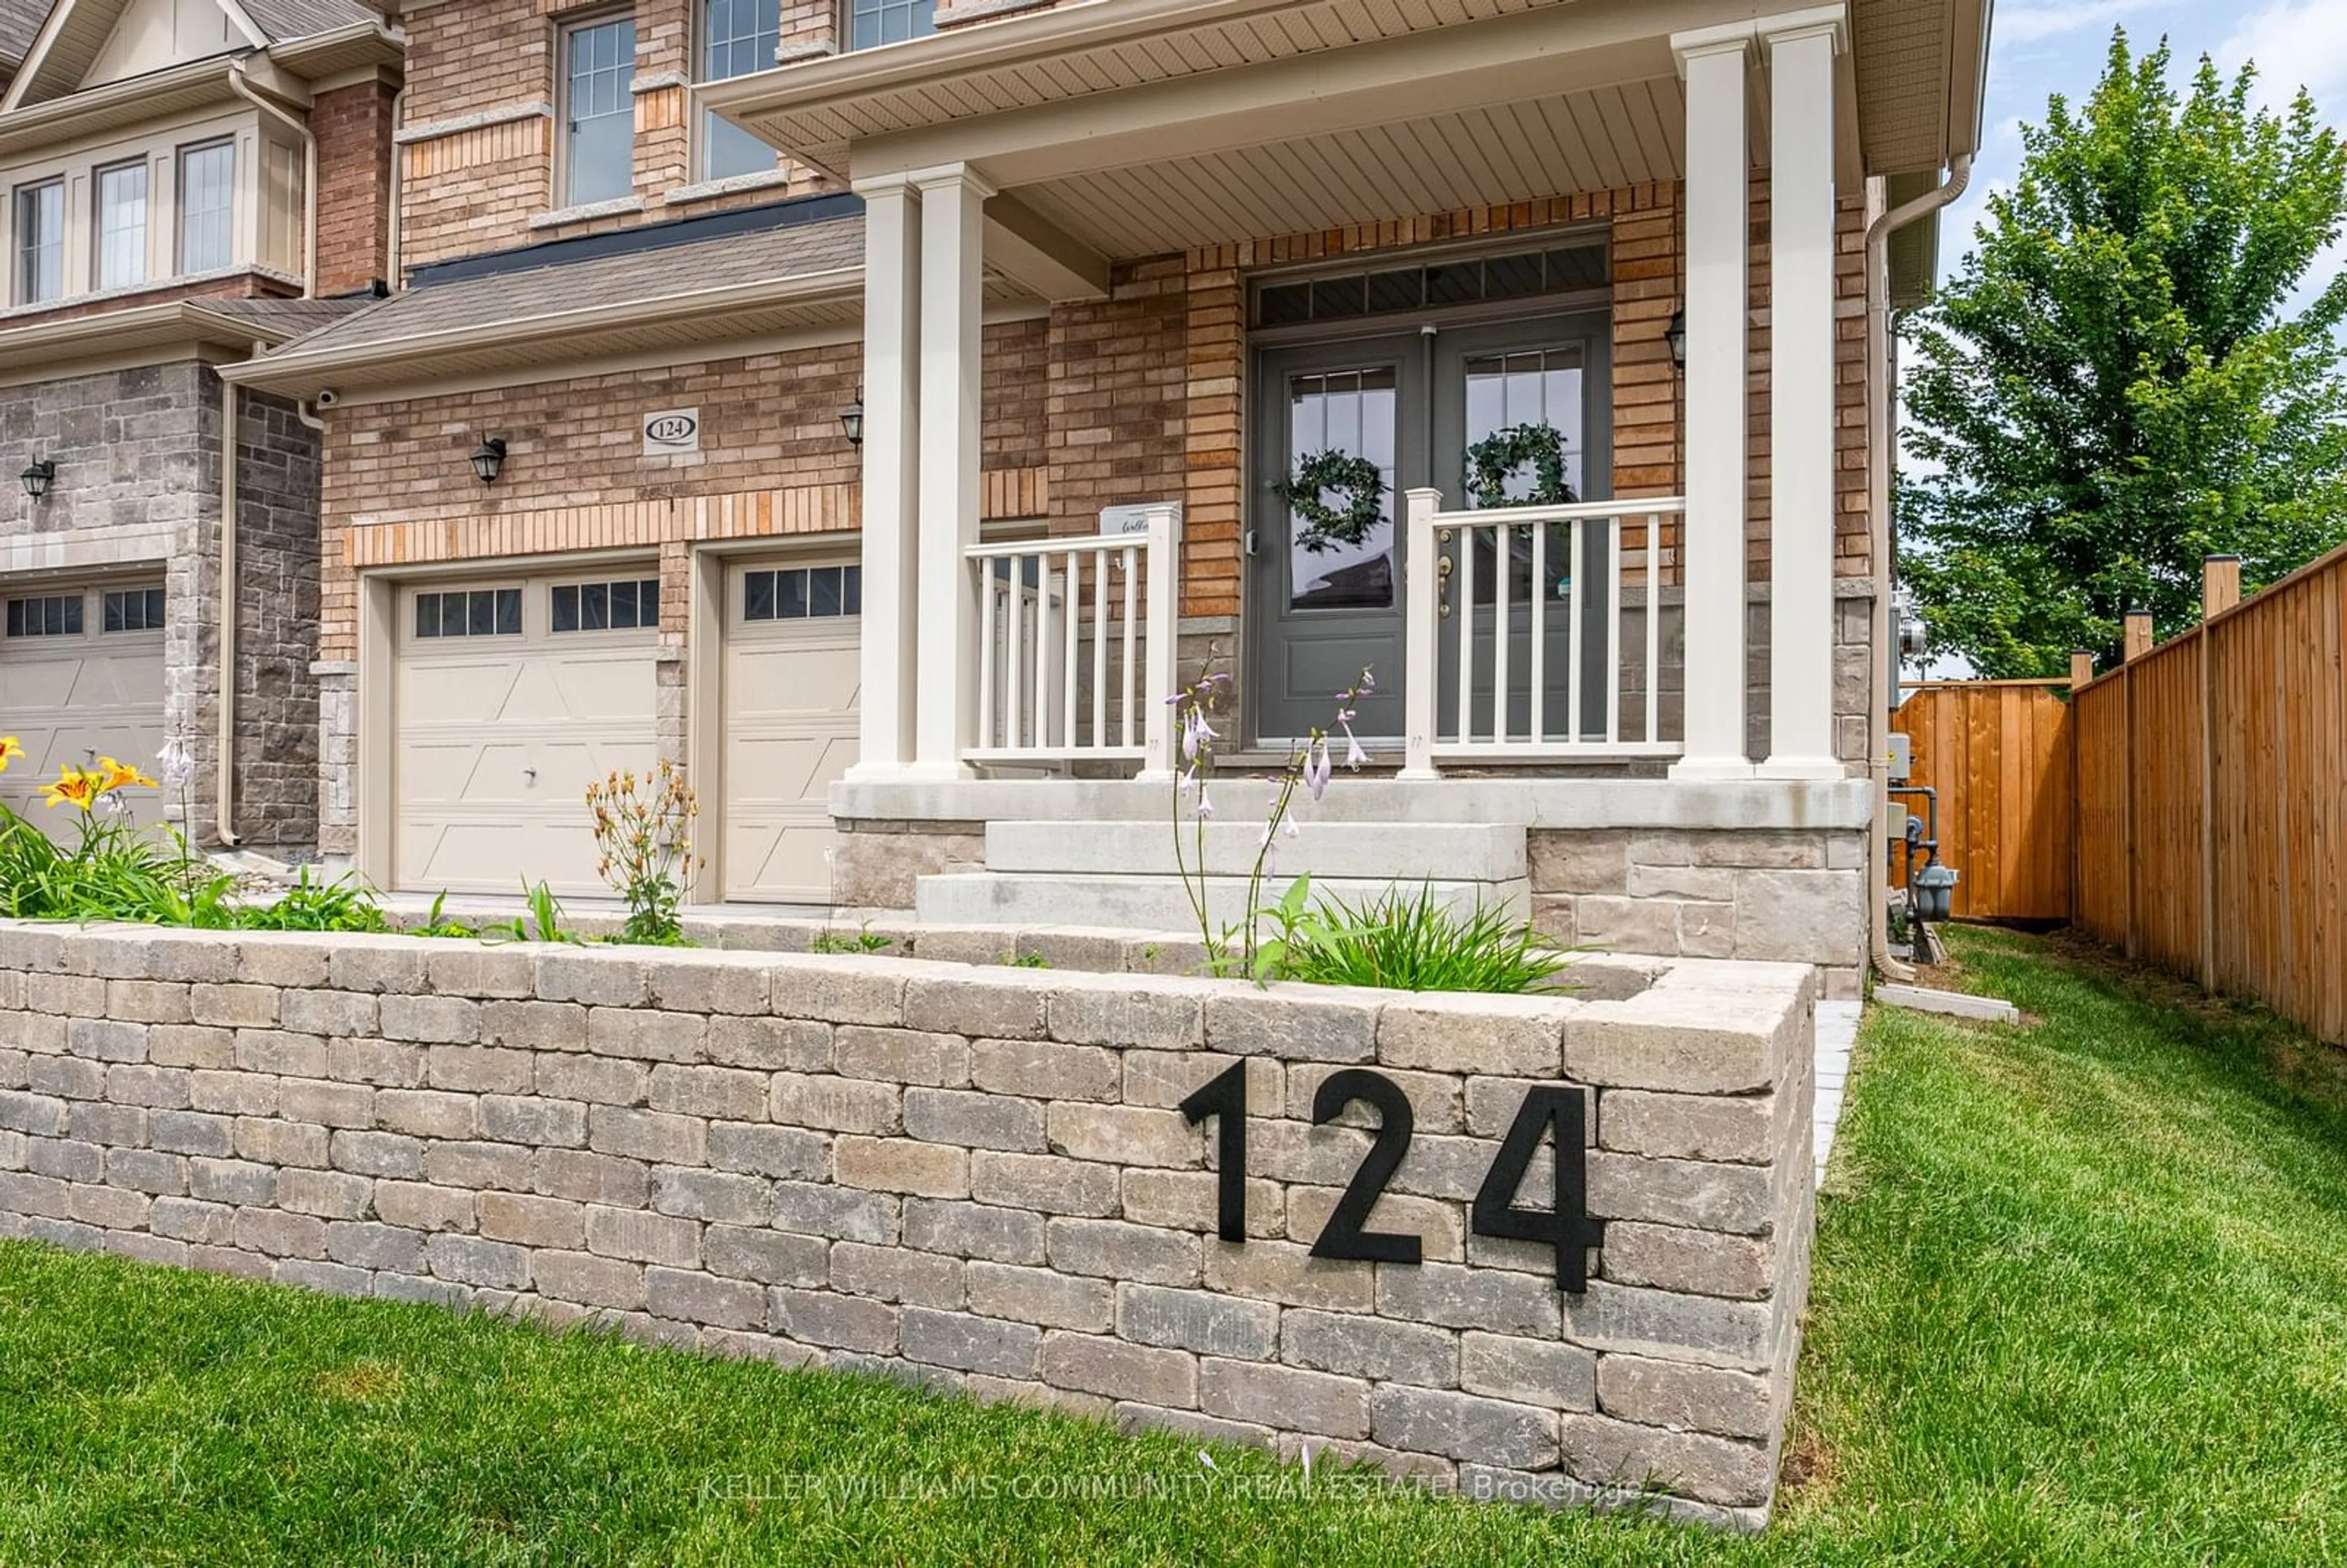 Home with brick exterior material for 124 Courtney St, Clarington Ontario L1C 7H4